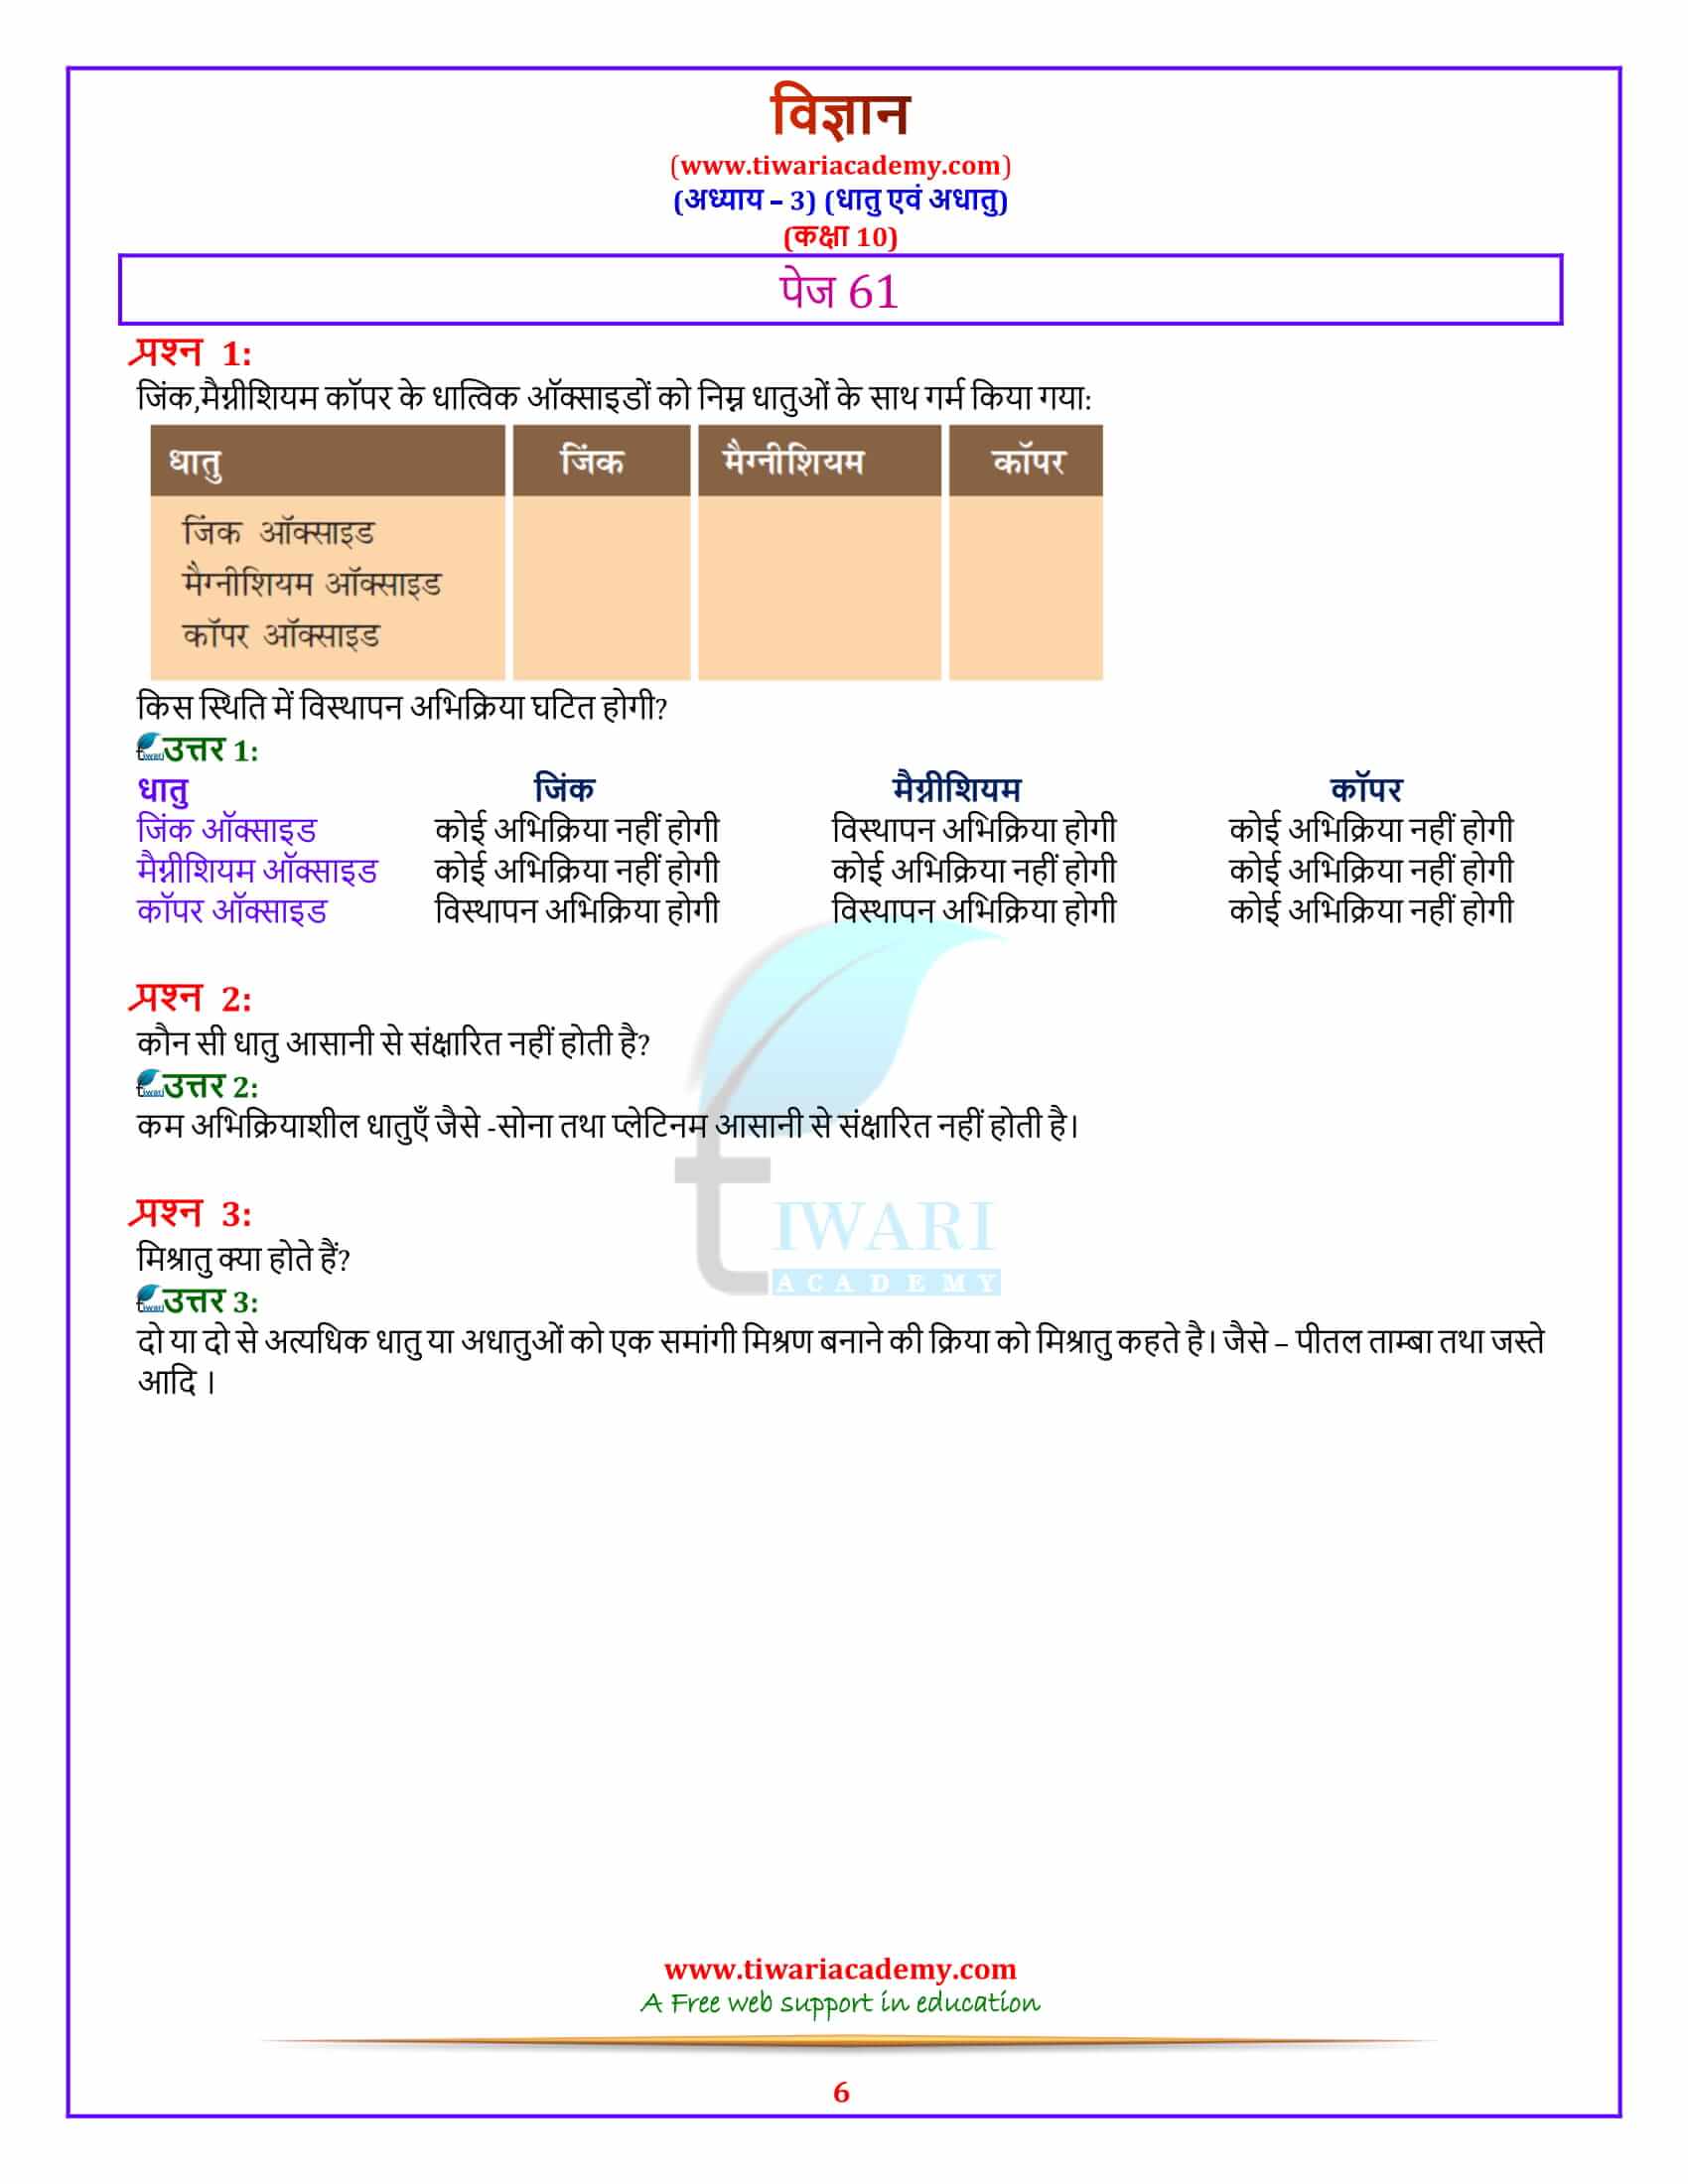 10 Science Chapter 3 Metals and Non-Metals पेज 61 के उत्तर